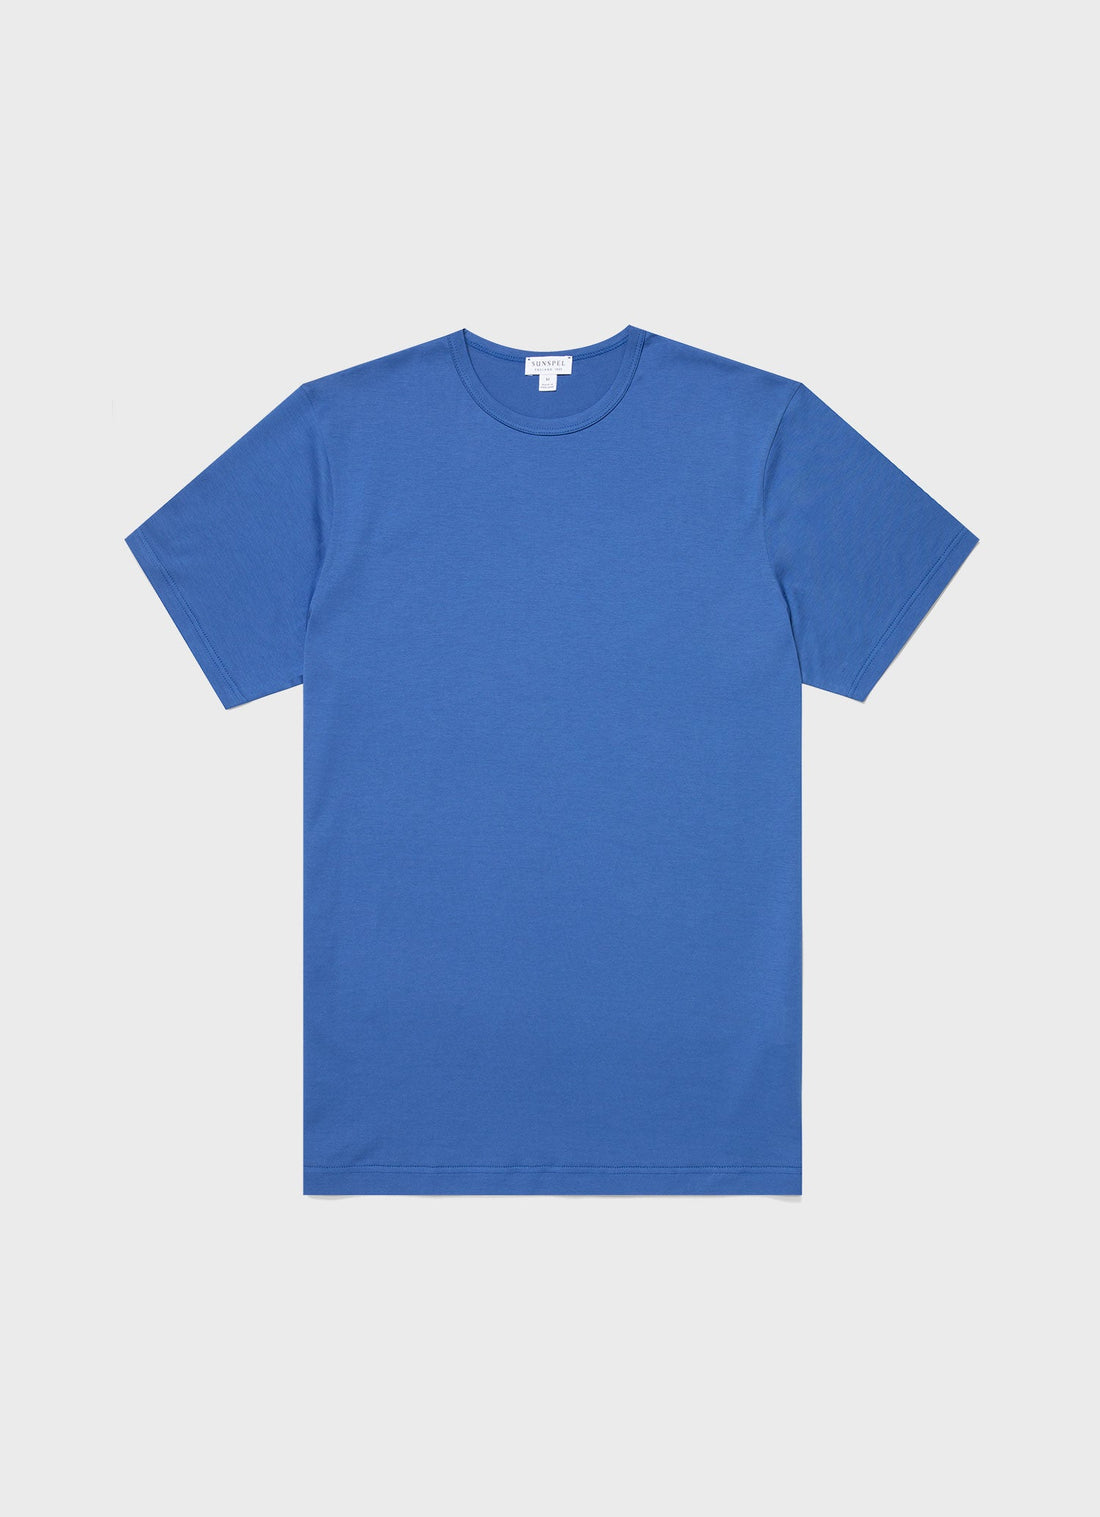 Men's Classic T-shirt in French Blue